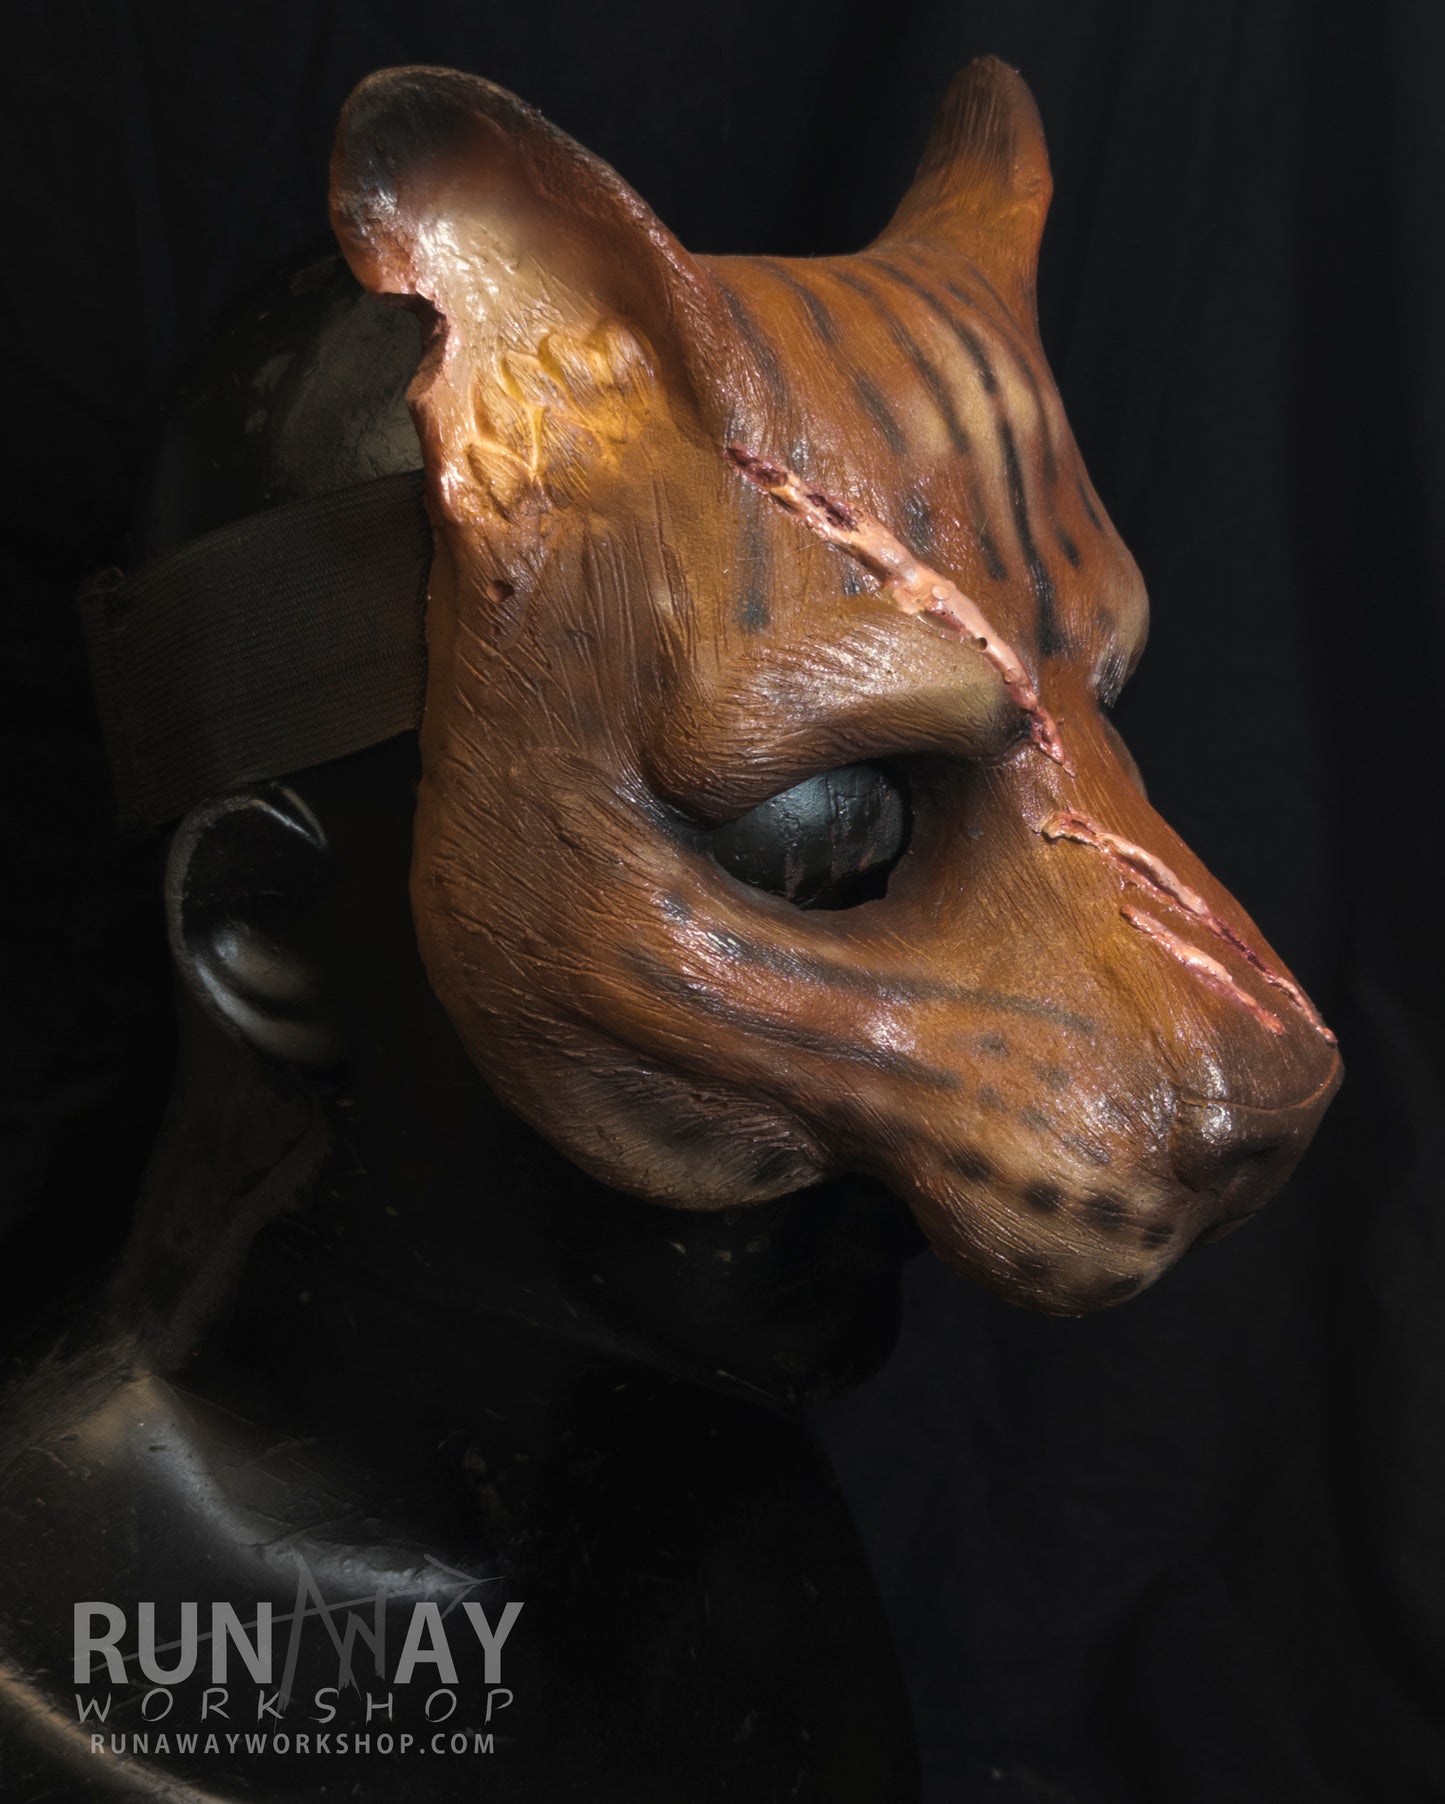 Brown khajiit, battle scarred feline durable mask for LARP, performance and costuming